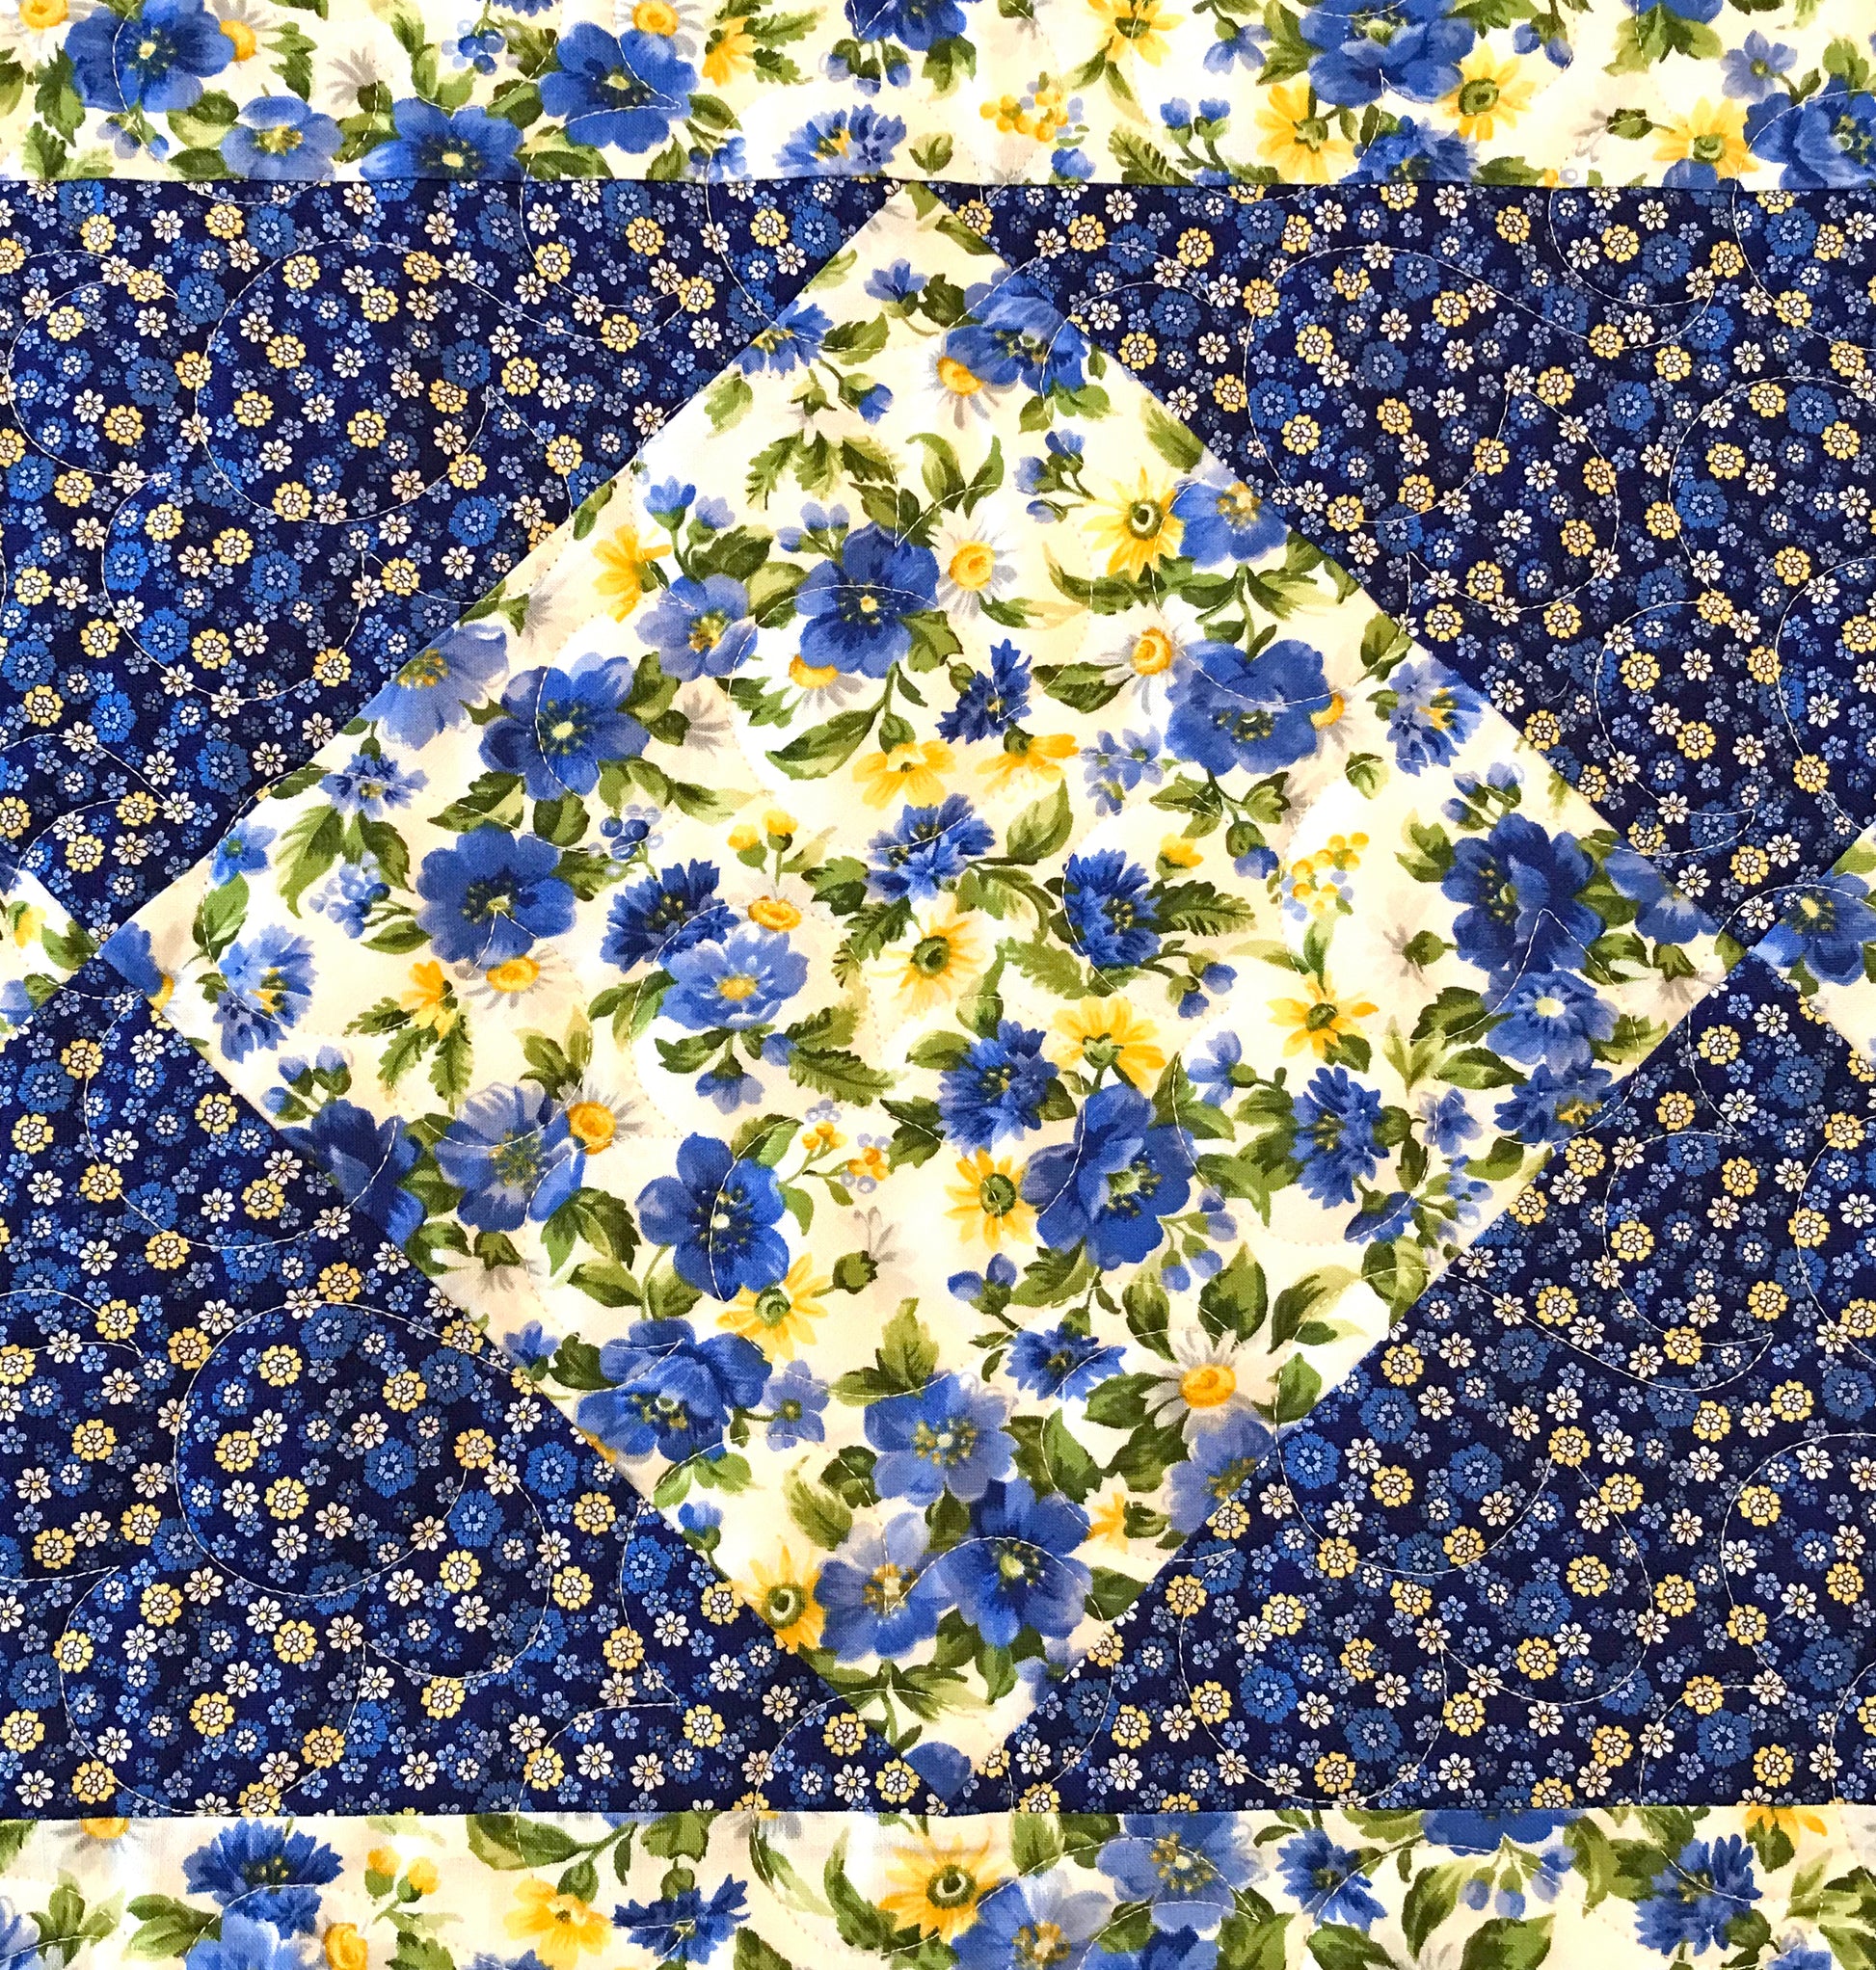 Close up of Blue and yellow floral table runner with a center diamond pattern displayed on a table